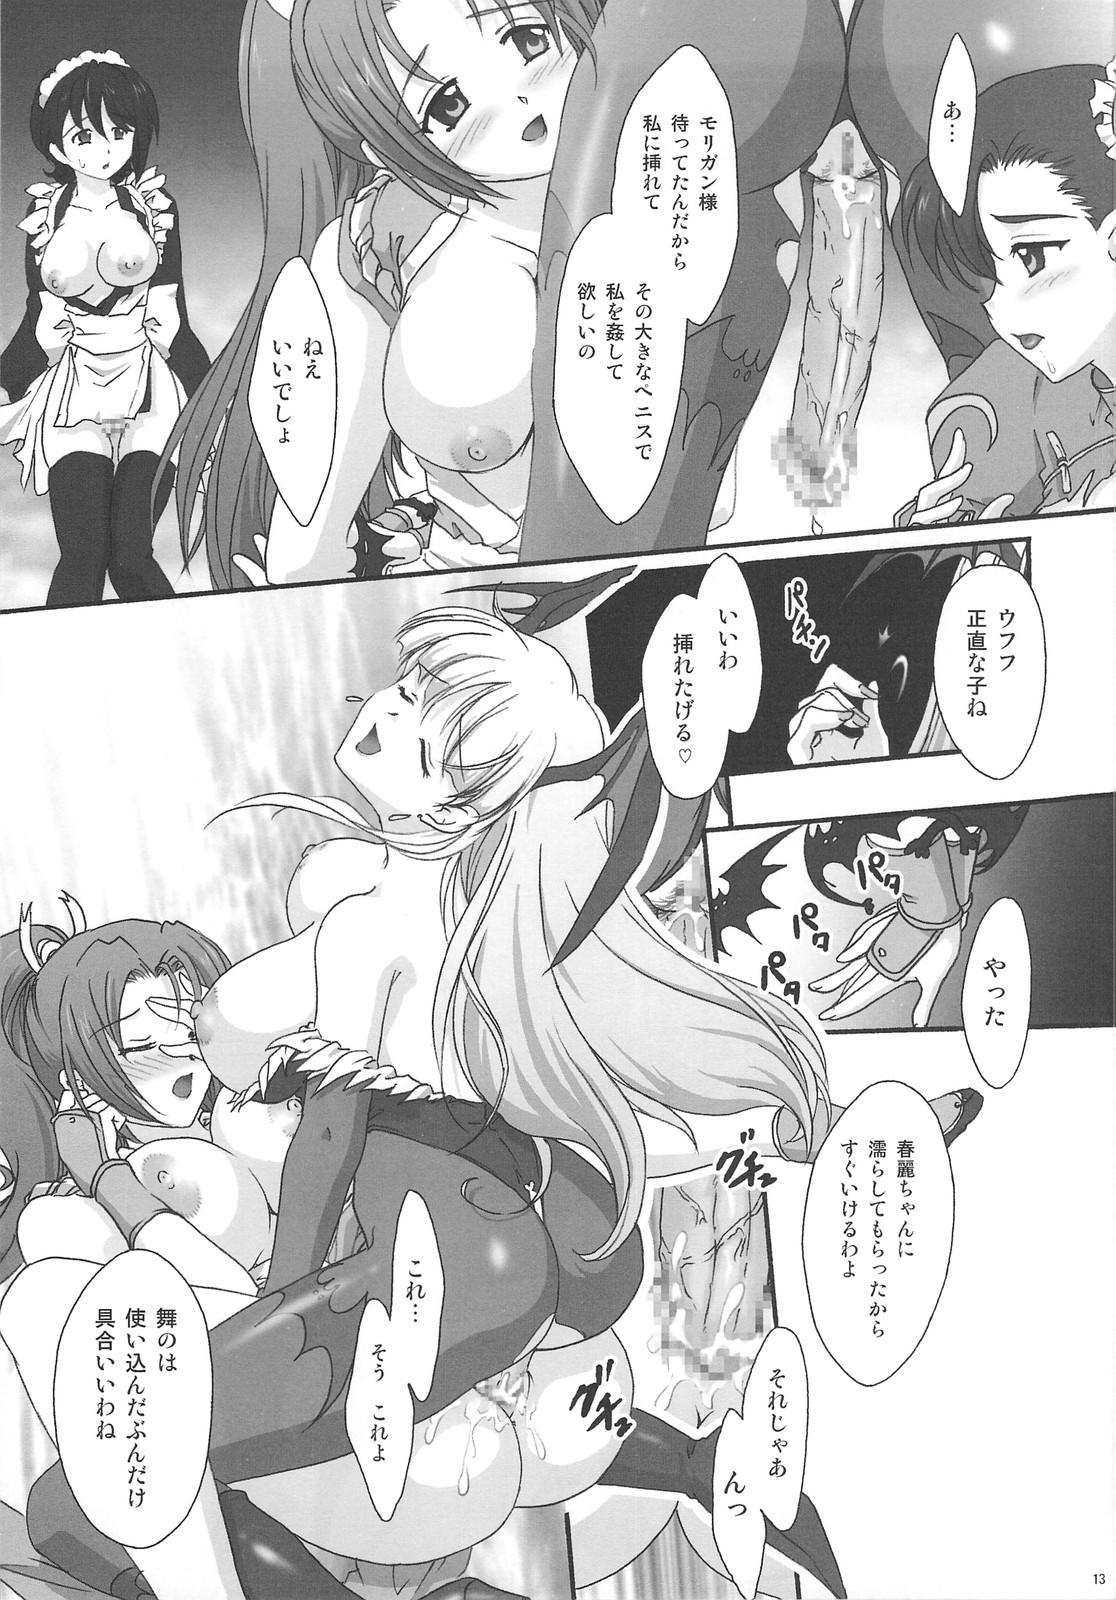 Rimming RUSH My DINNER - Street fighter King of fighters Darkstalkers Samurai spirits Footworship - Page 12